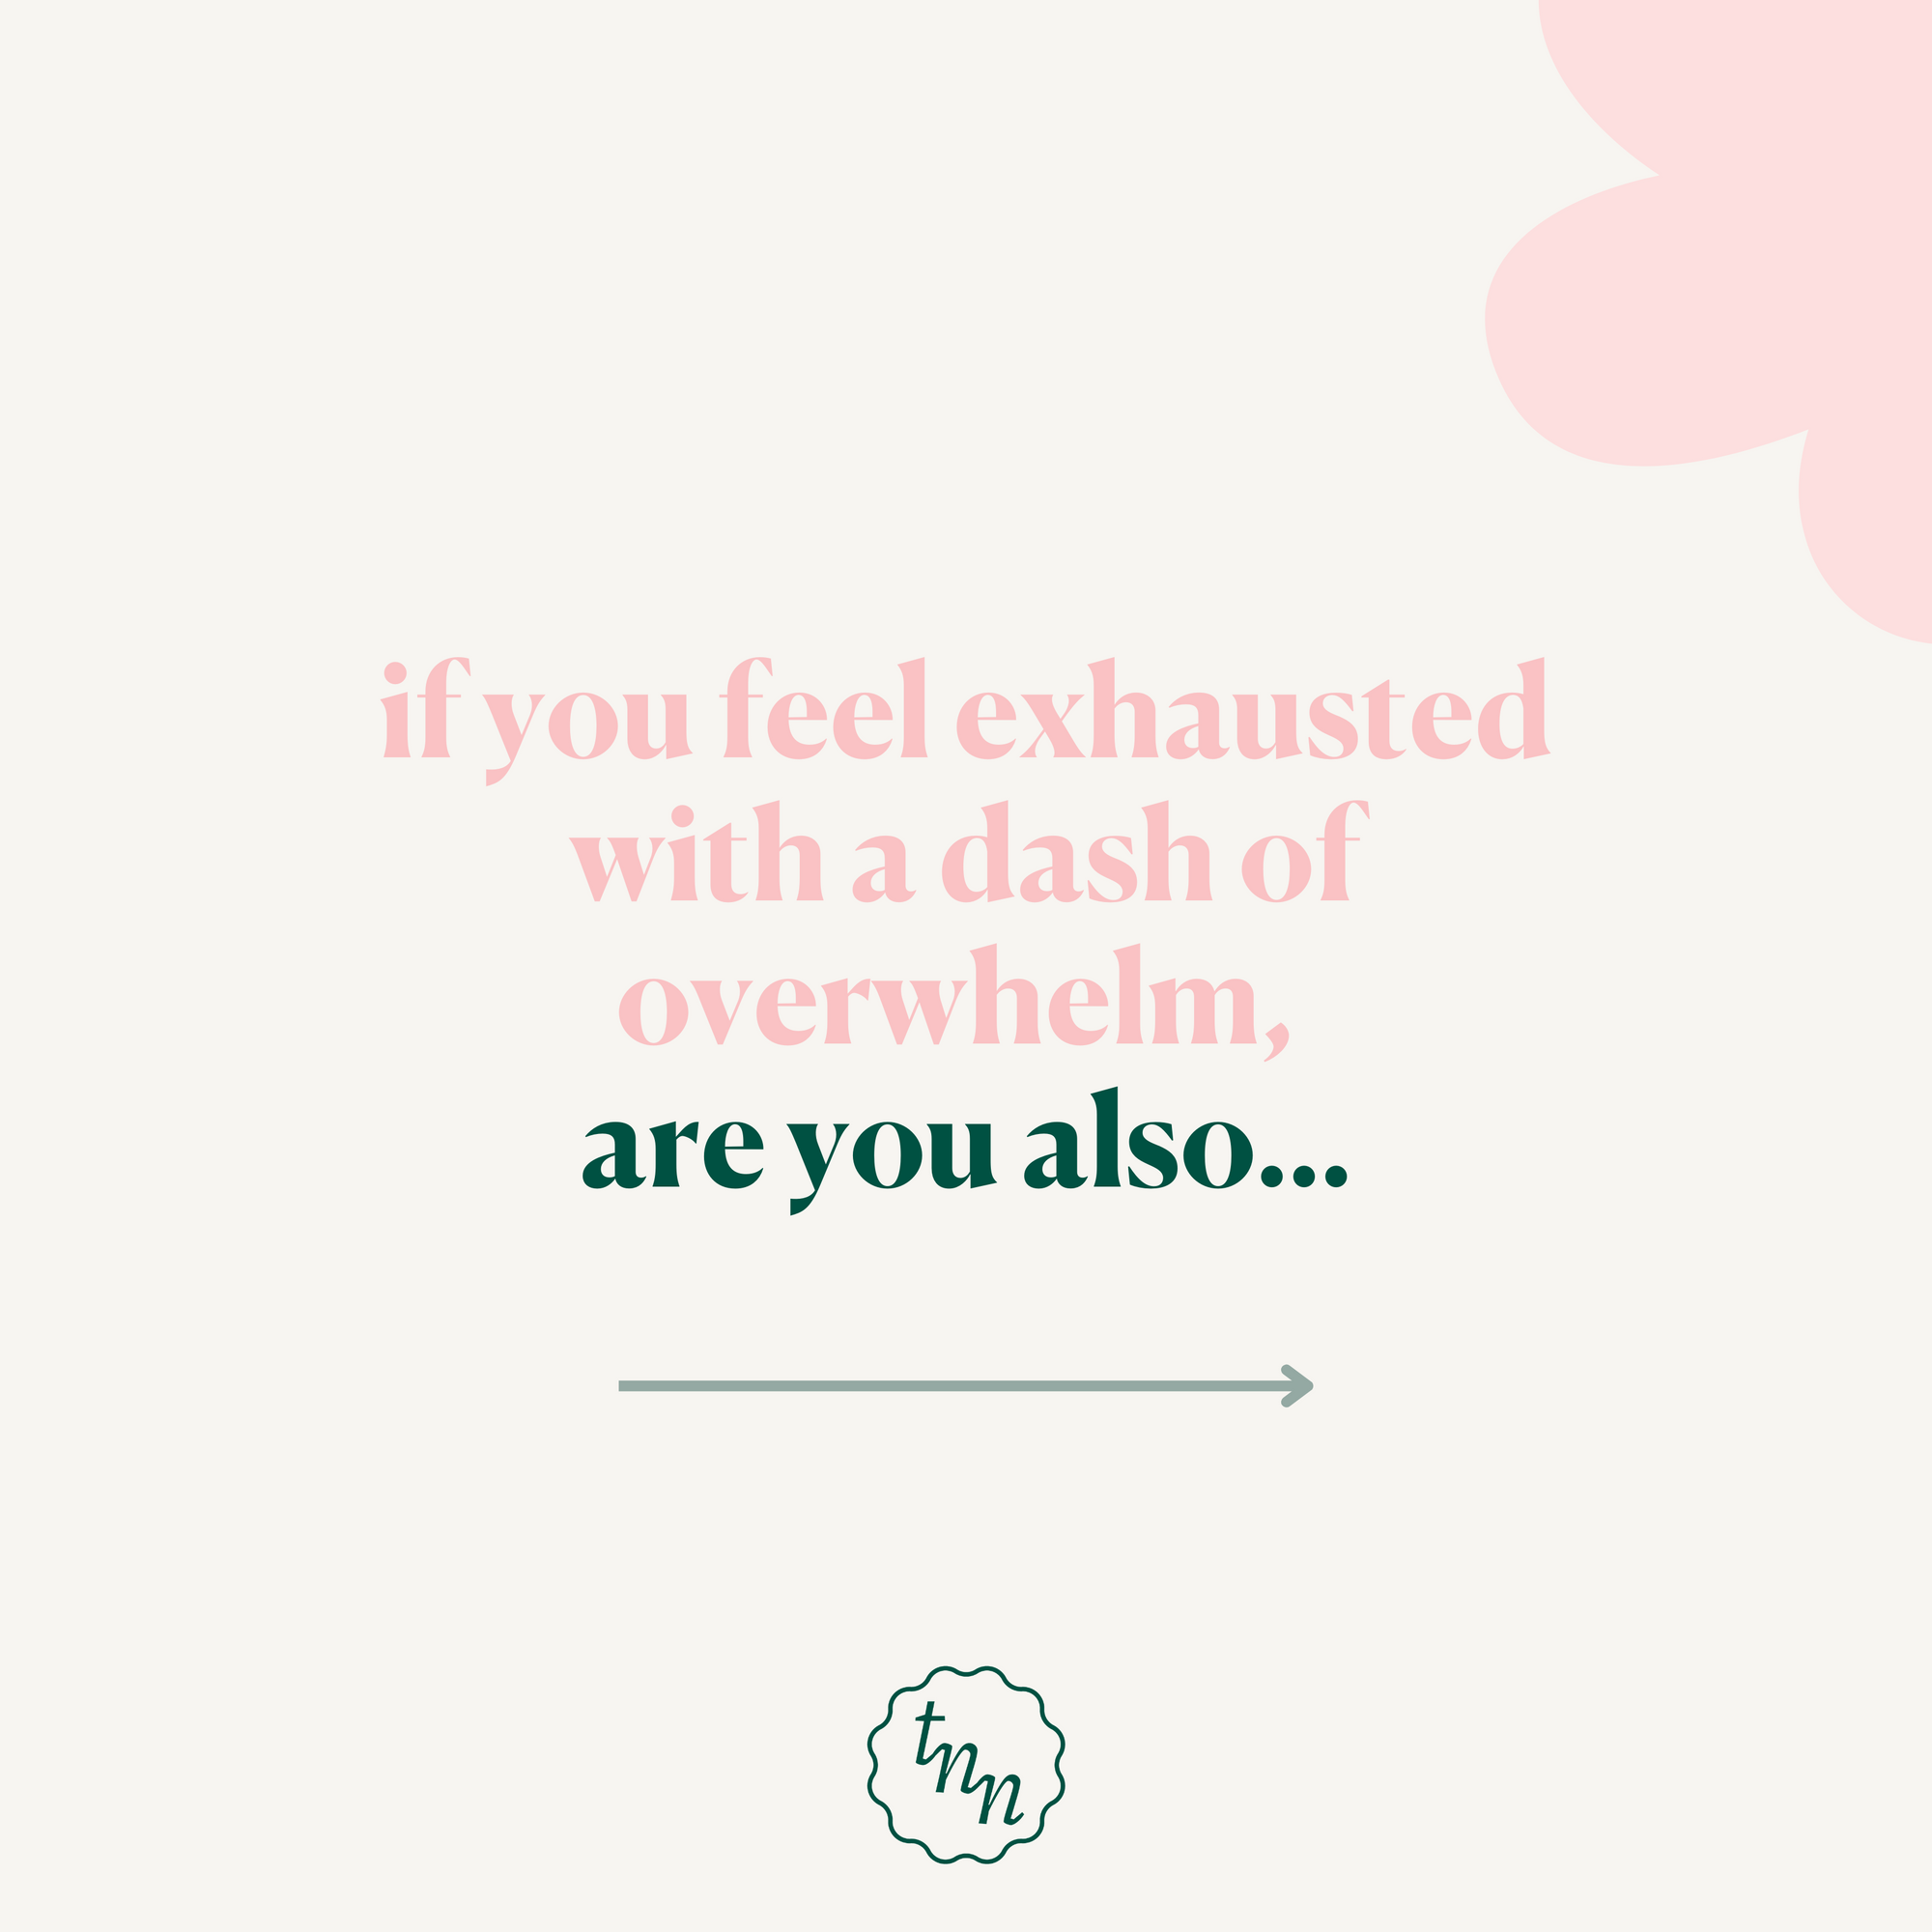 If you are exhausted with a dash of overwhelm, are you also....